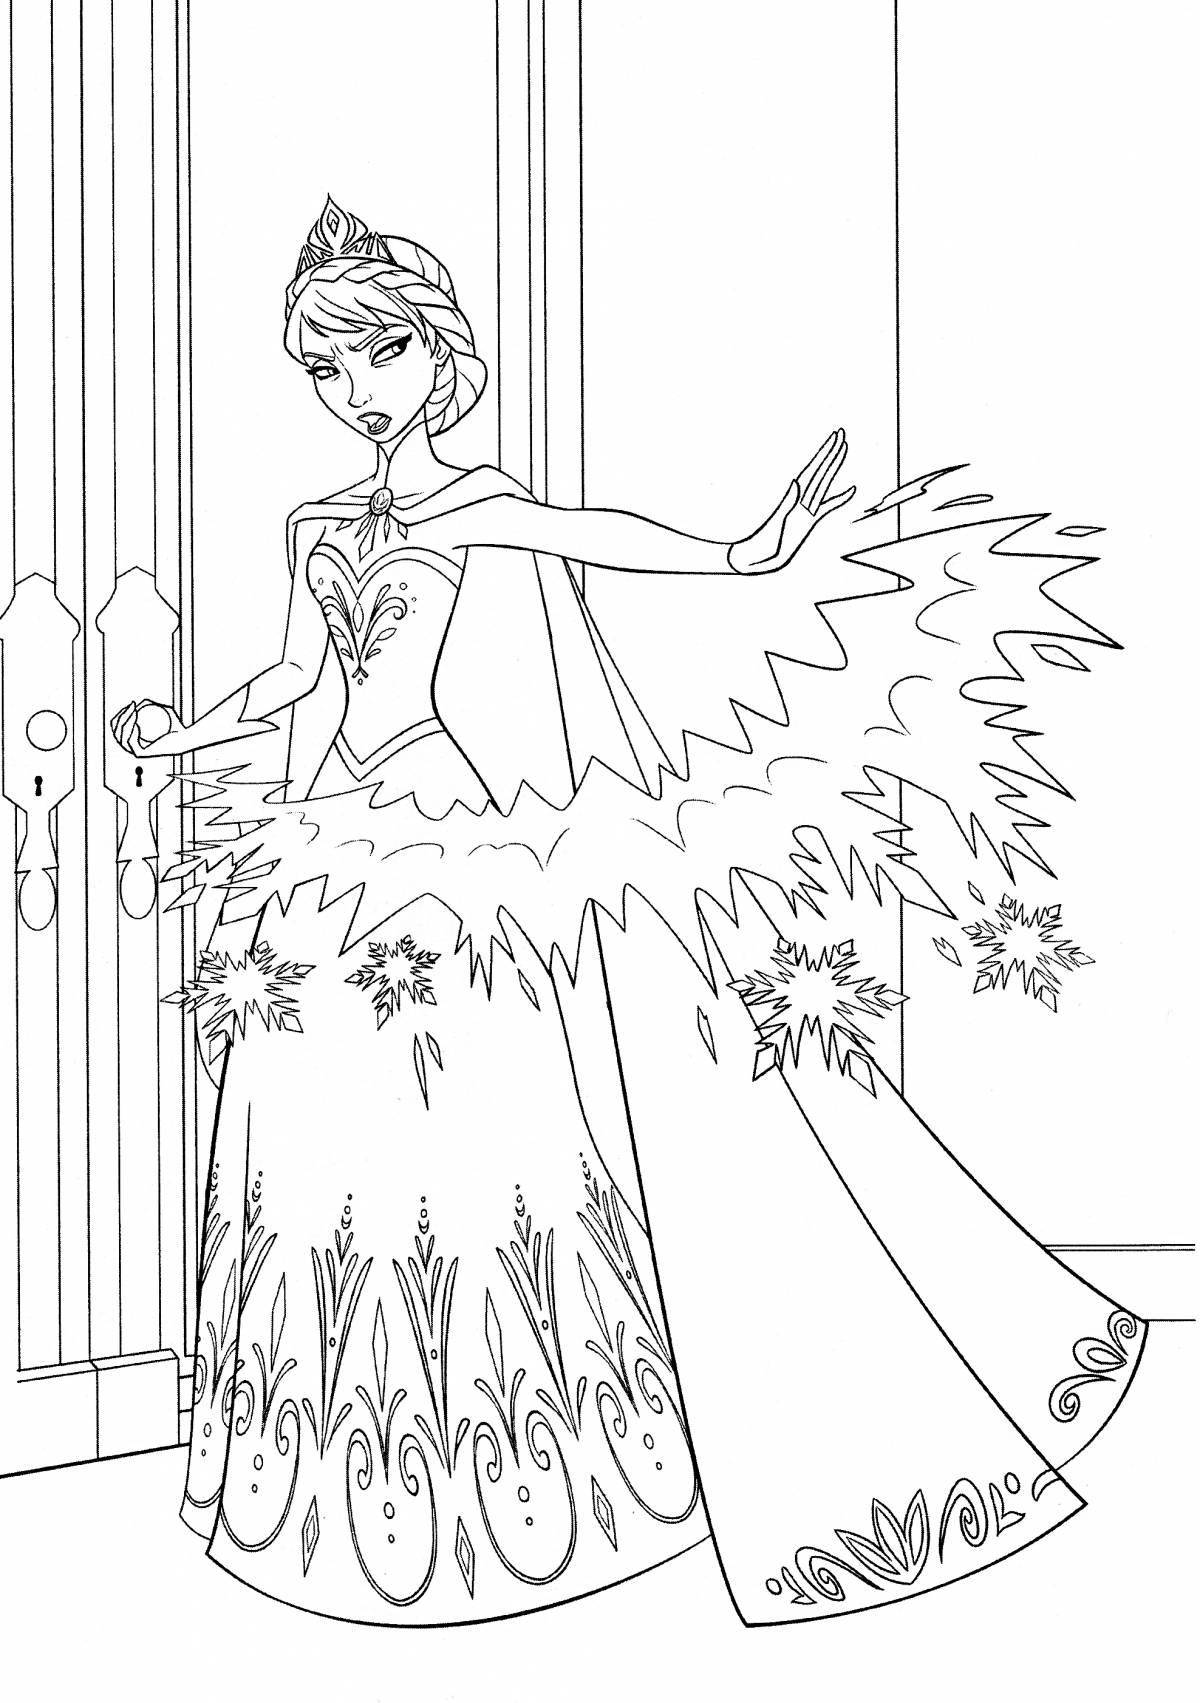 Coloring page glorious queen elsa